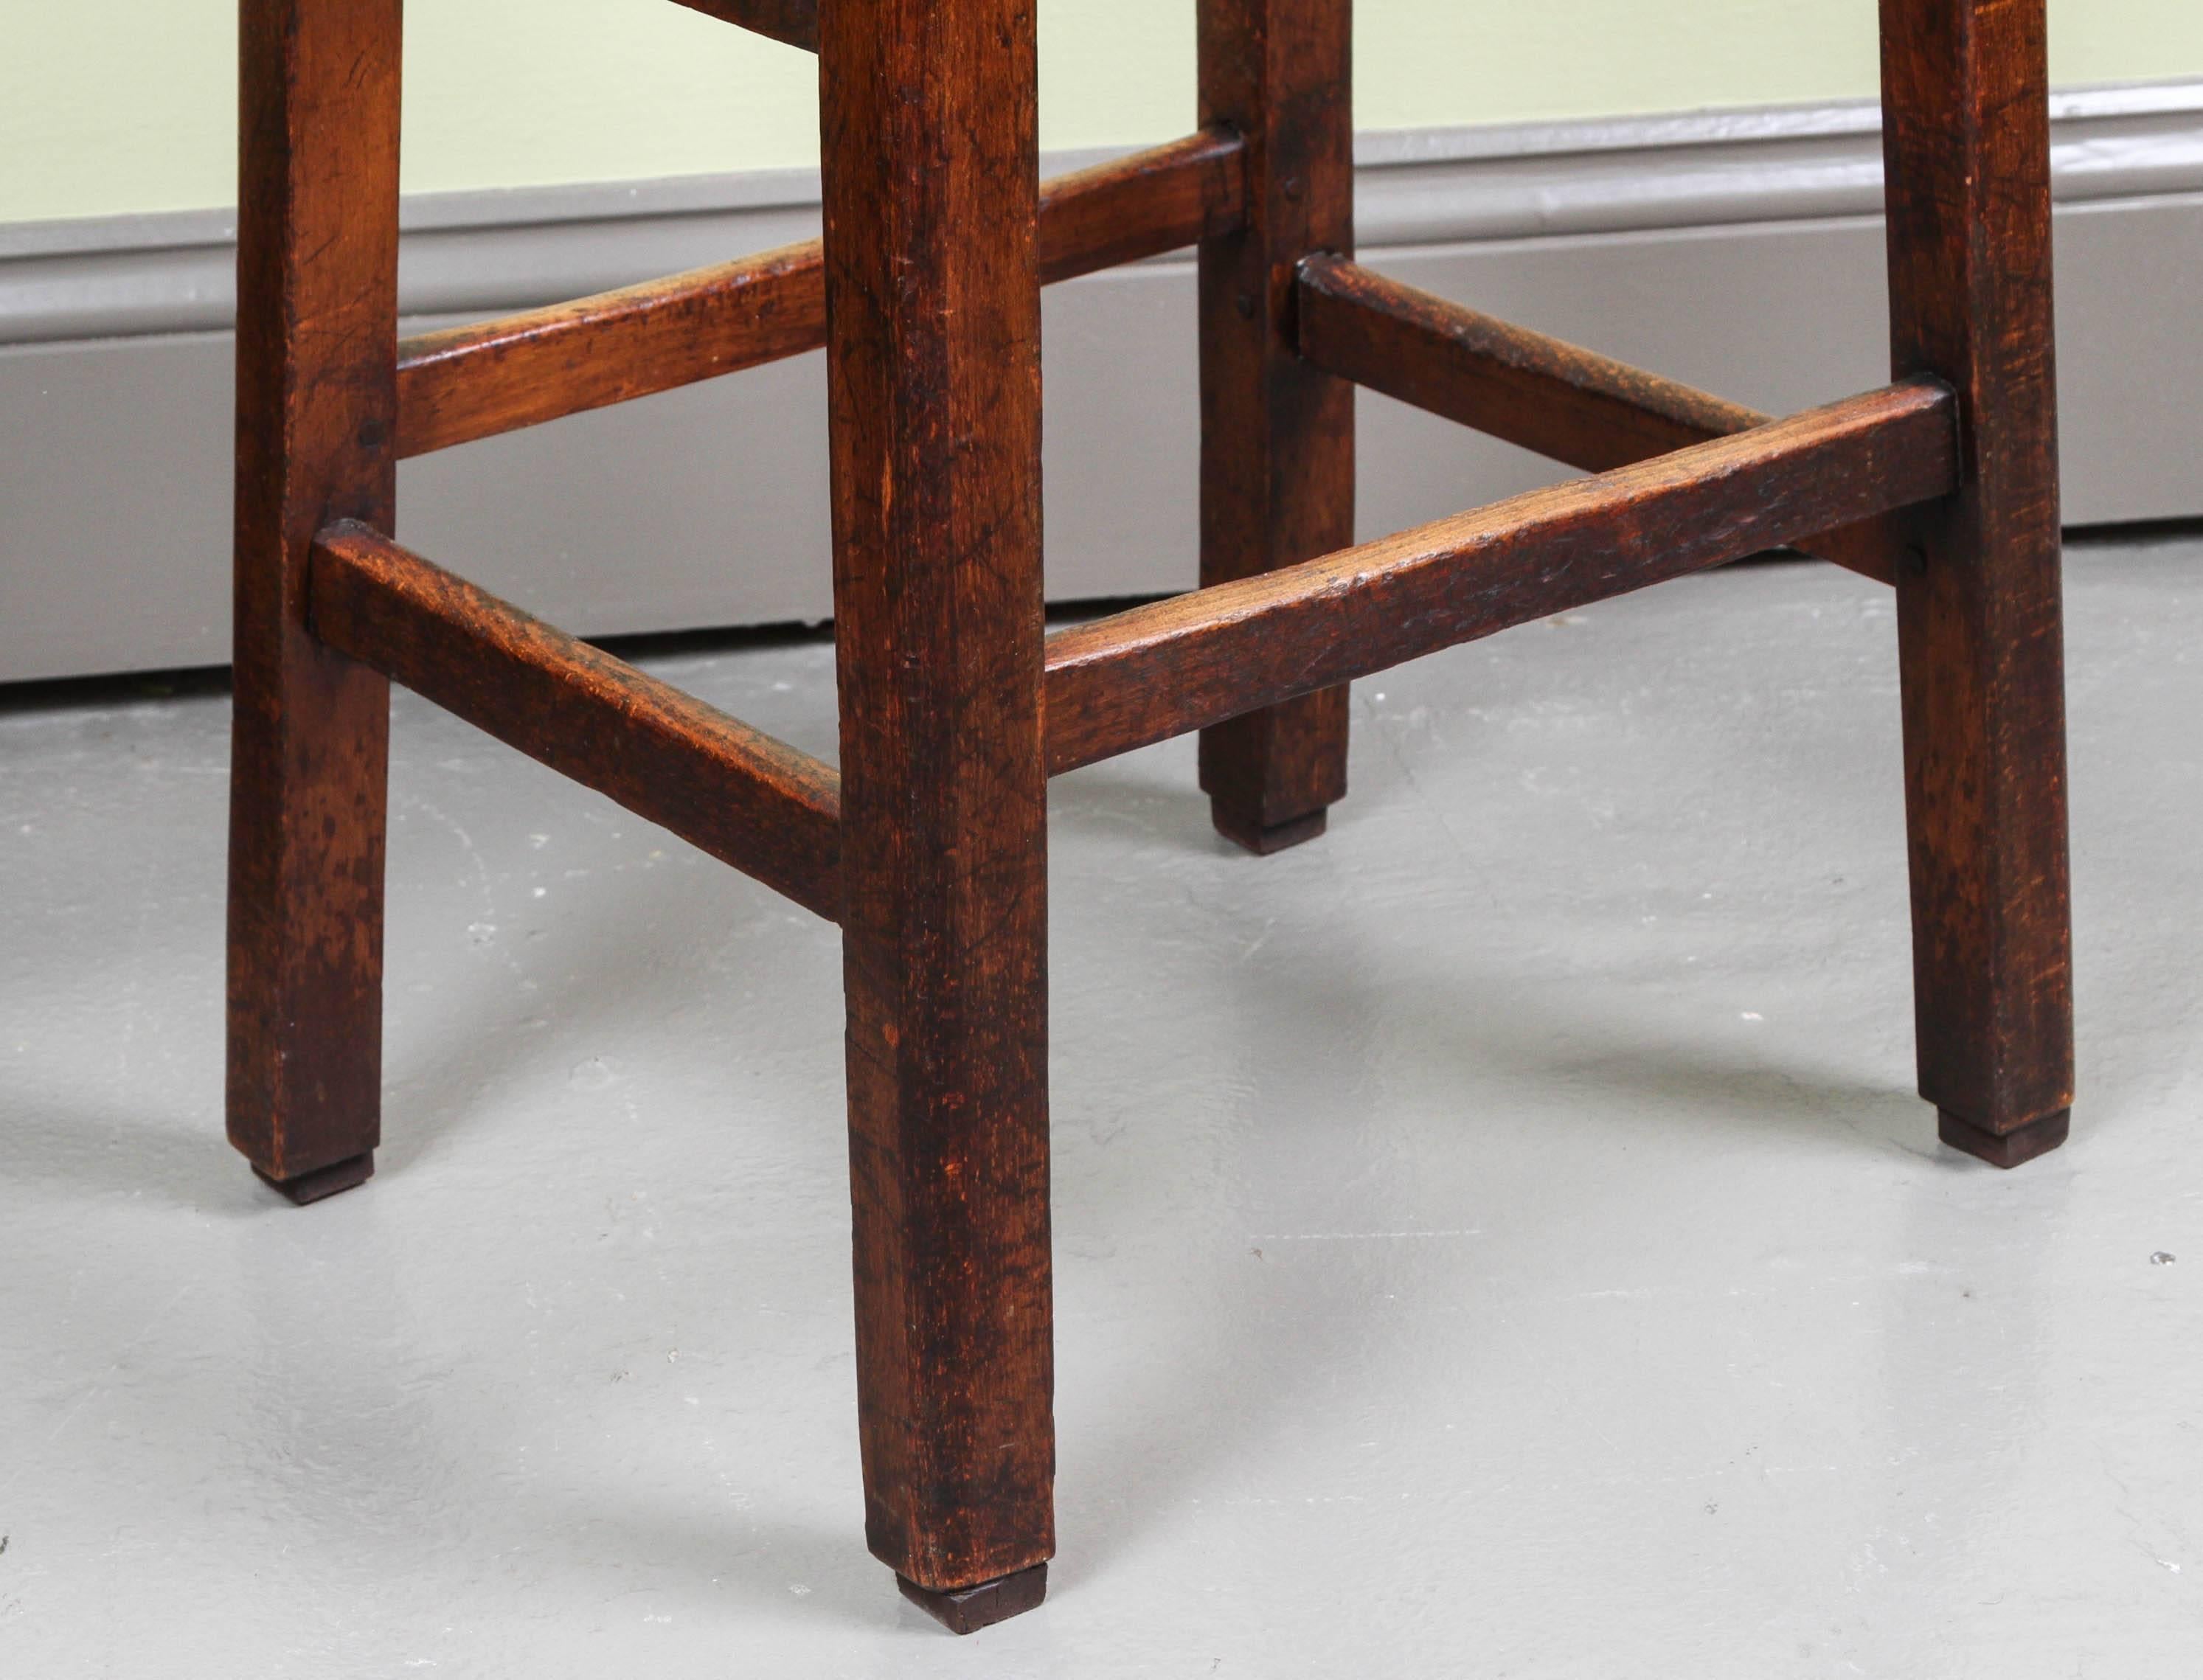 Hand-Crafted 19th Century English Oak and Elm Stool